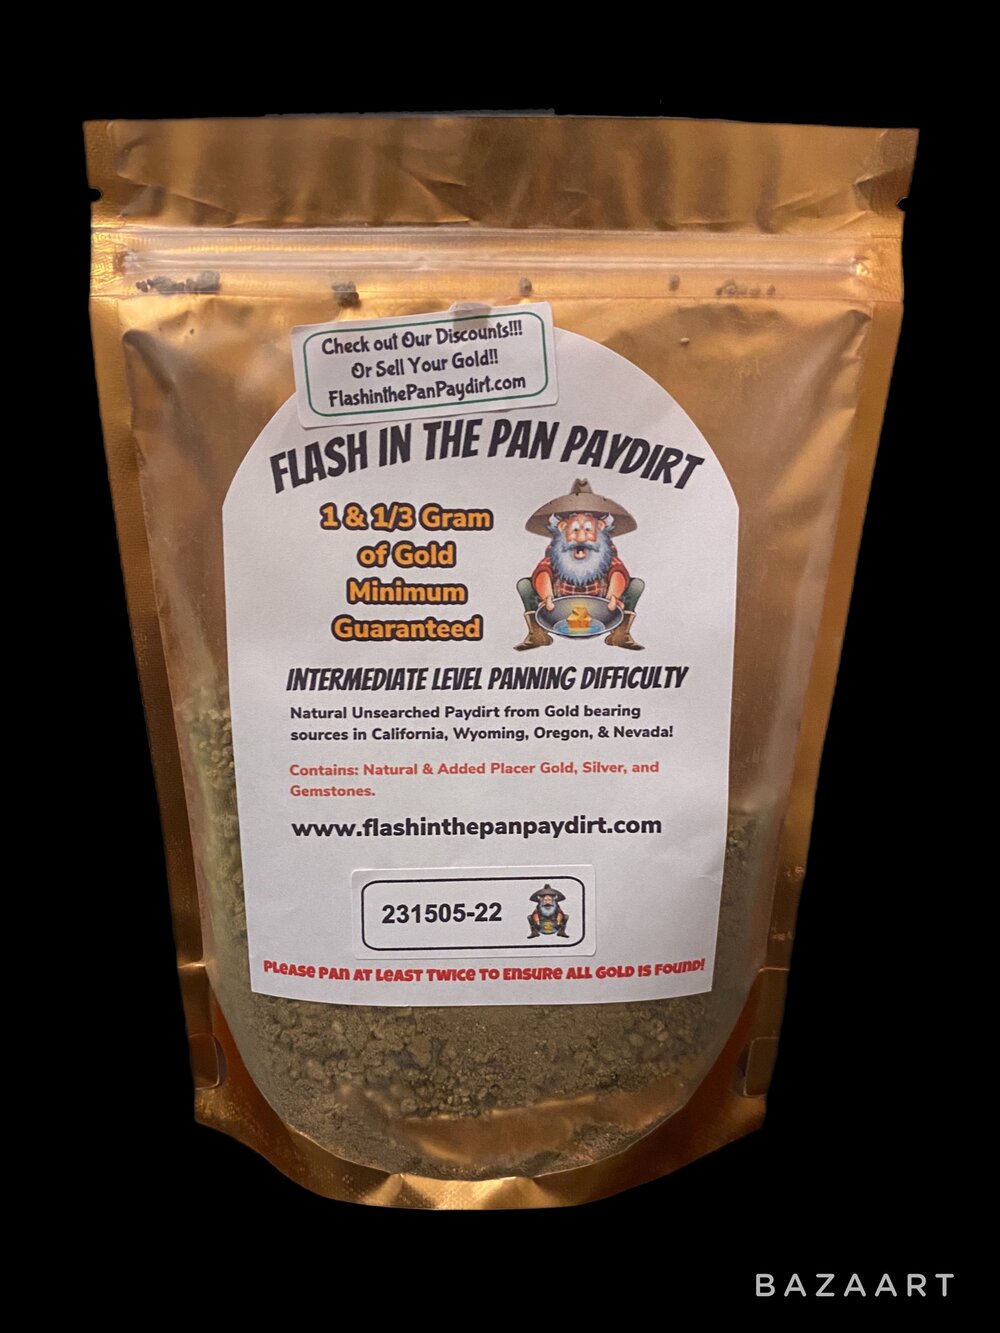 Our Products — Flash in the Pan Paydirt